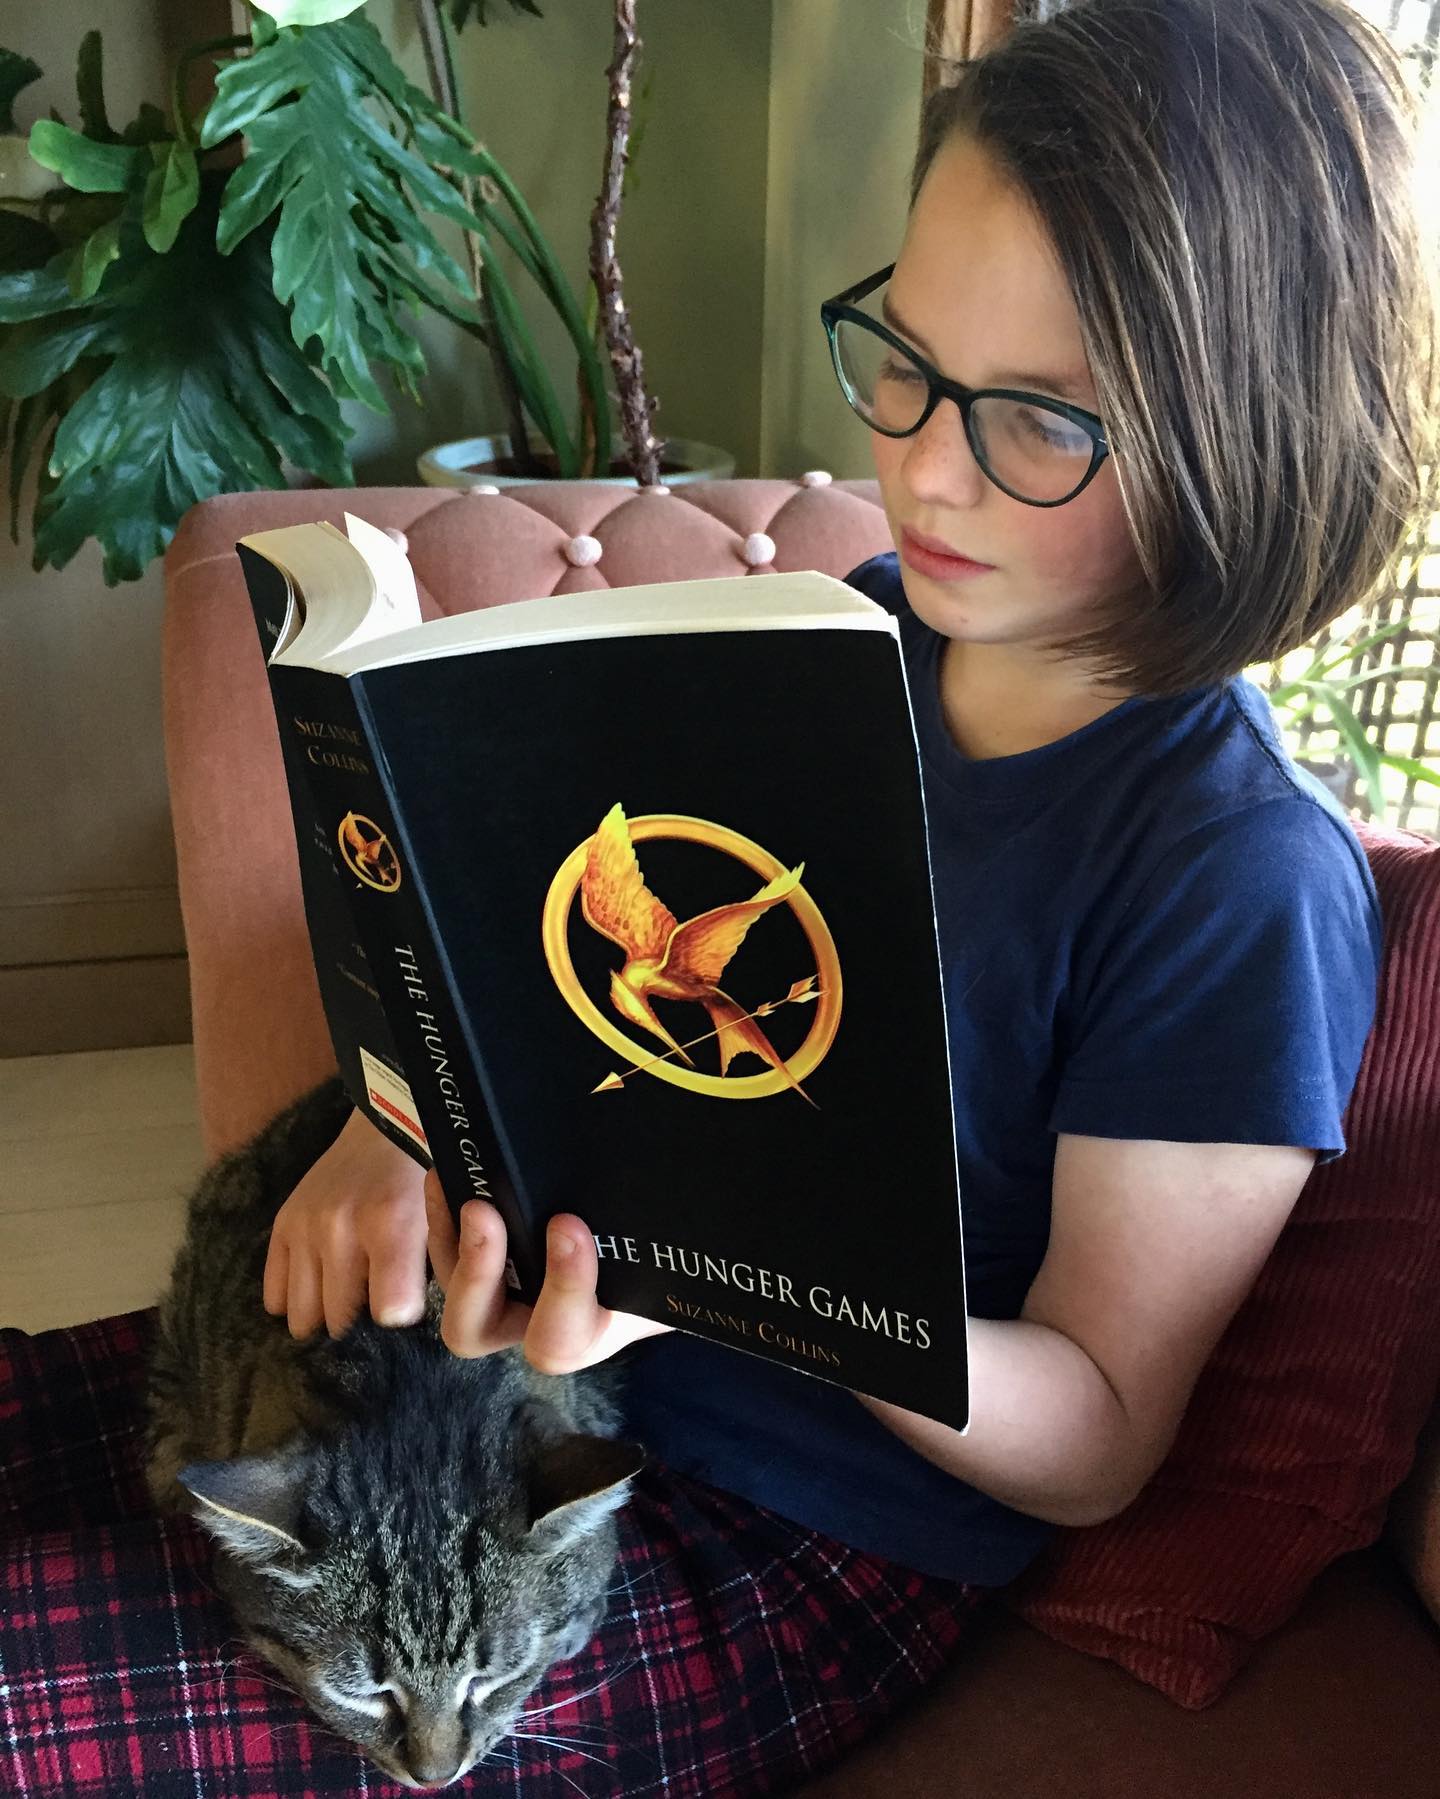 A young girl is sitting in a chair with a cat in her lap as she reads The Hunger Games by Suzanne Collins